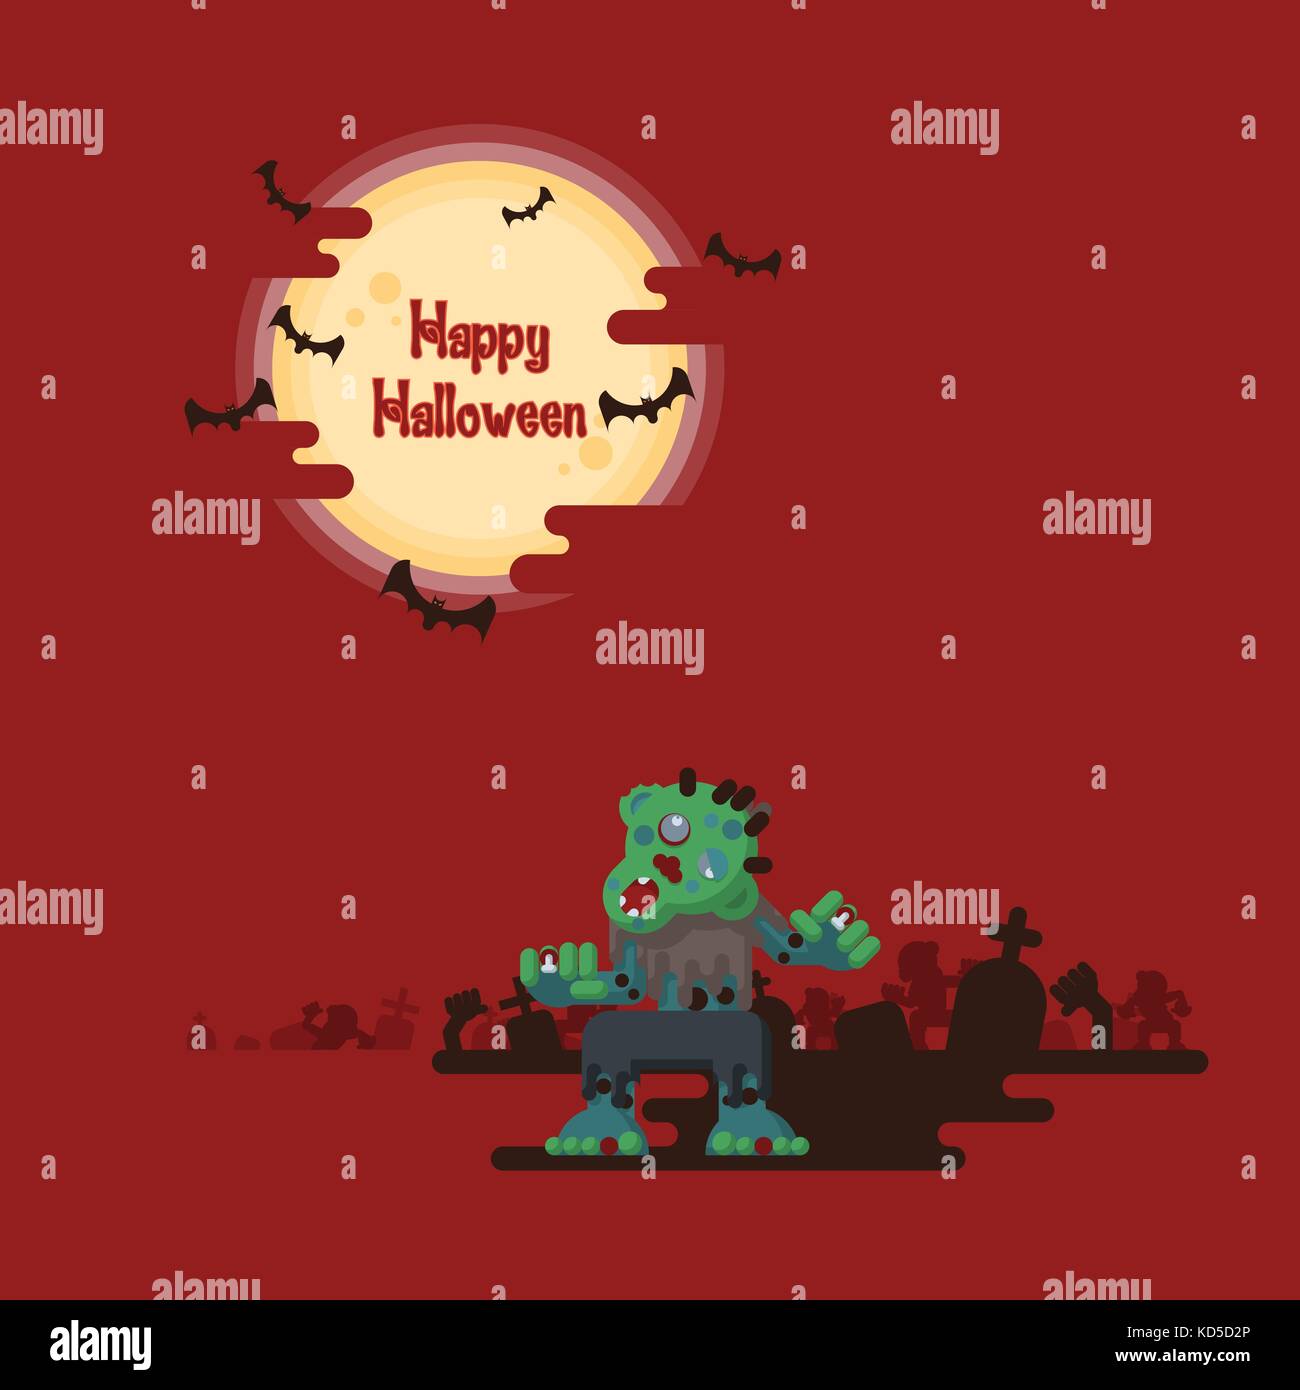 Happy Halloween, zombies walking and rising out from the ground at night in a graveyard under glowing full moon and flying bats with dark shadow on re Stock Vector